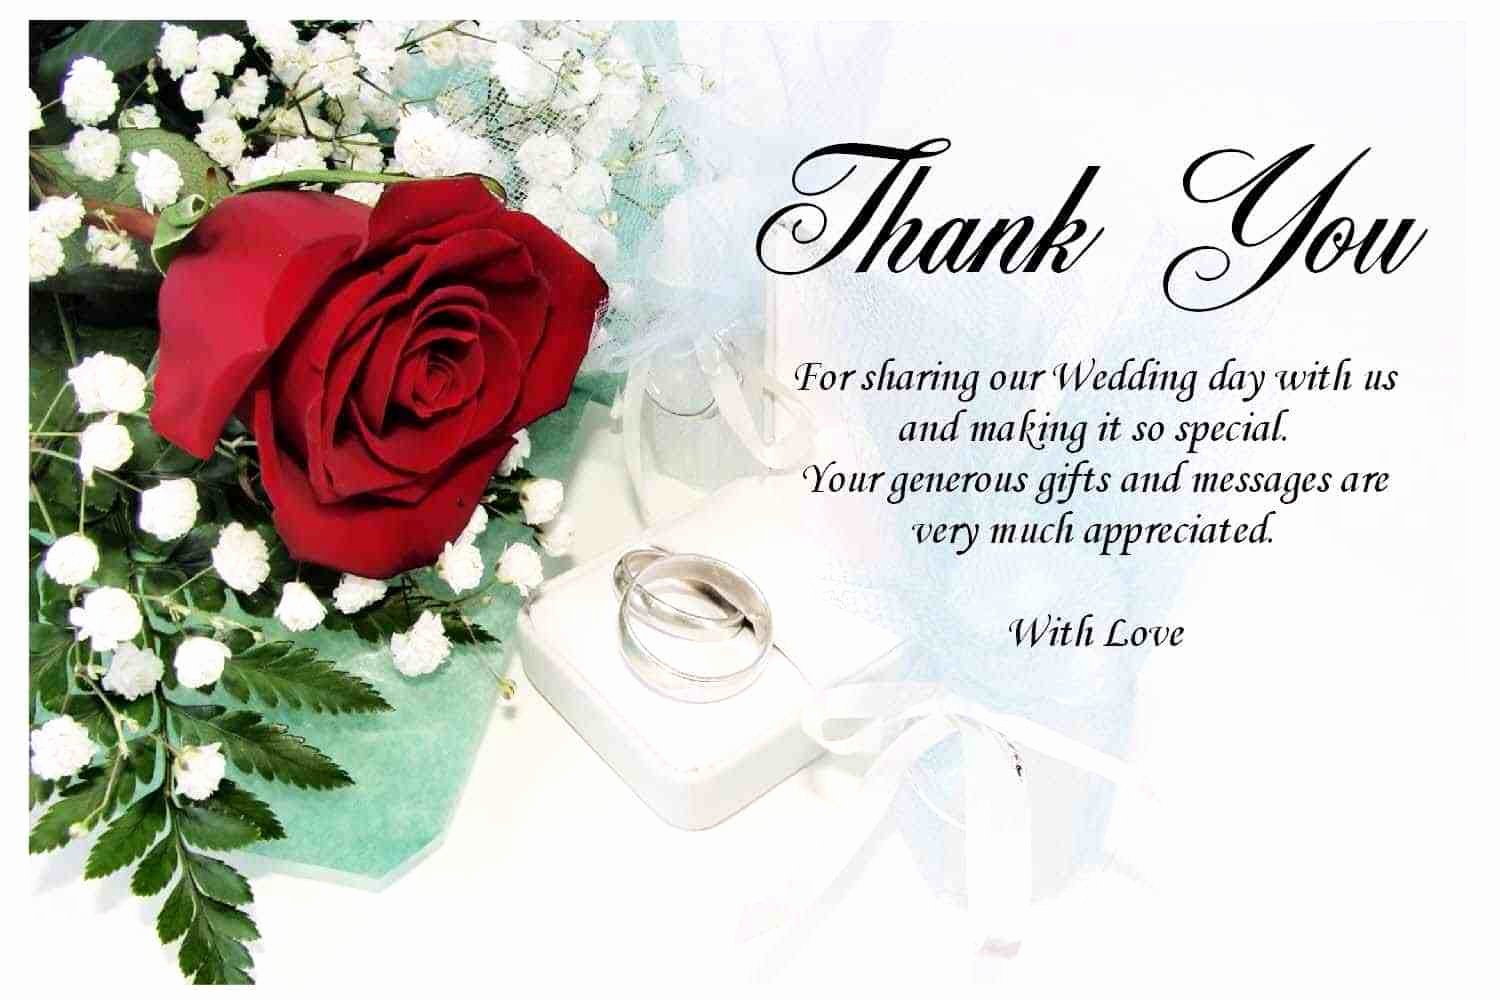 Thank You Letter after Wedding Ceremony